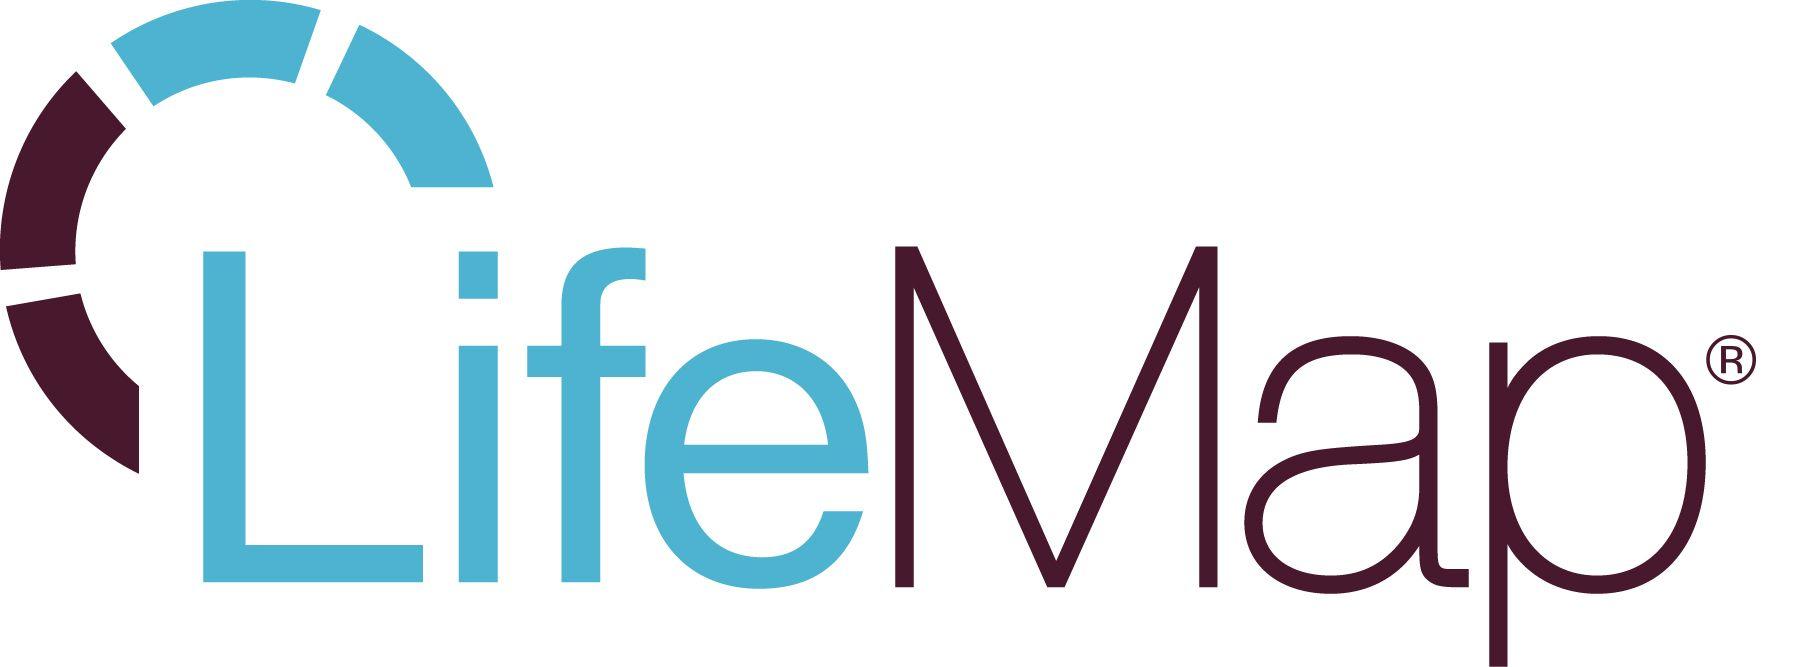 LifeMap Logo - LifeMap introduces specialized cancer coverage | Cambia Direct ...